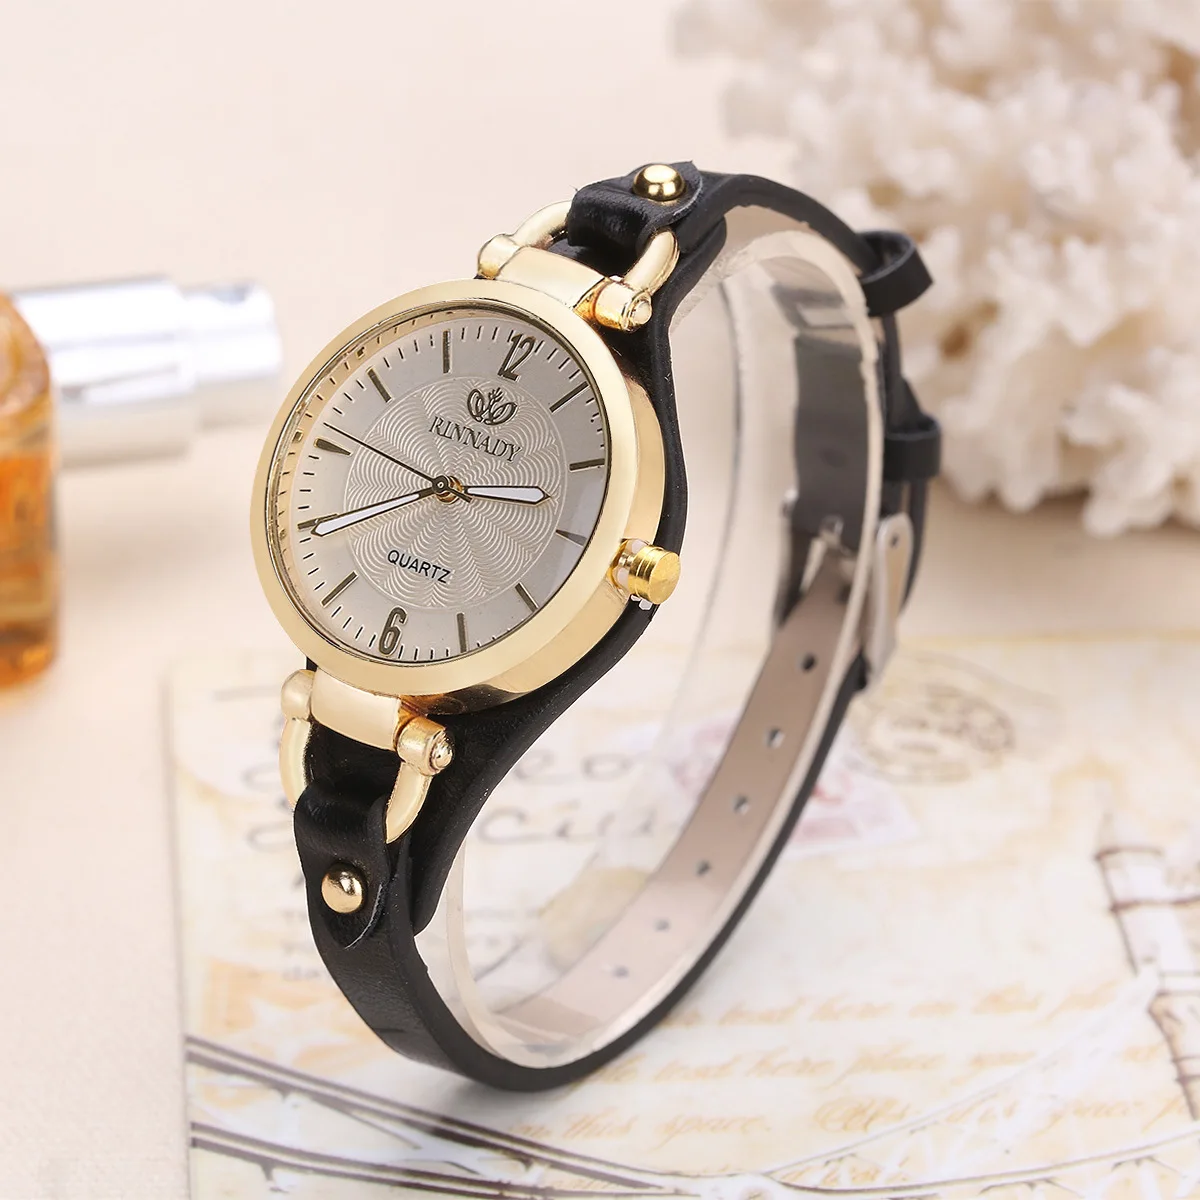 

High Quality Women Watch Leather Strap Quartz Watches Ladies Casual Wristwatches Clock Gift Reloj Mujer Montres Pour Femmes